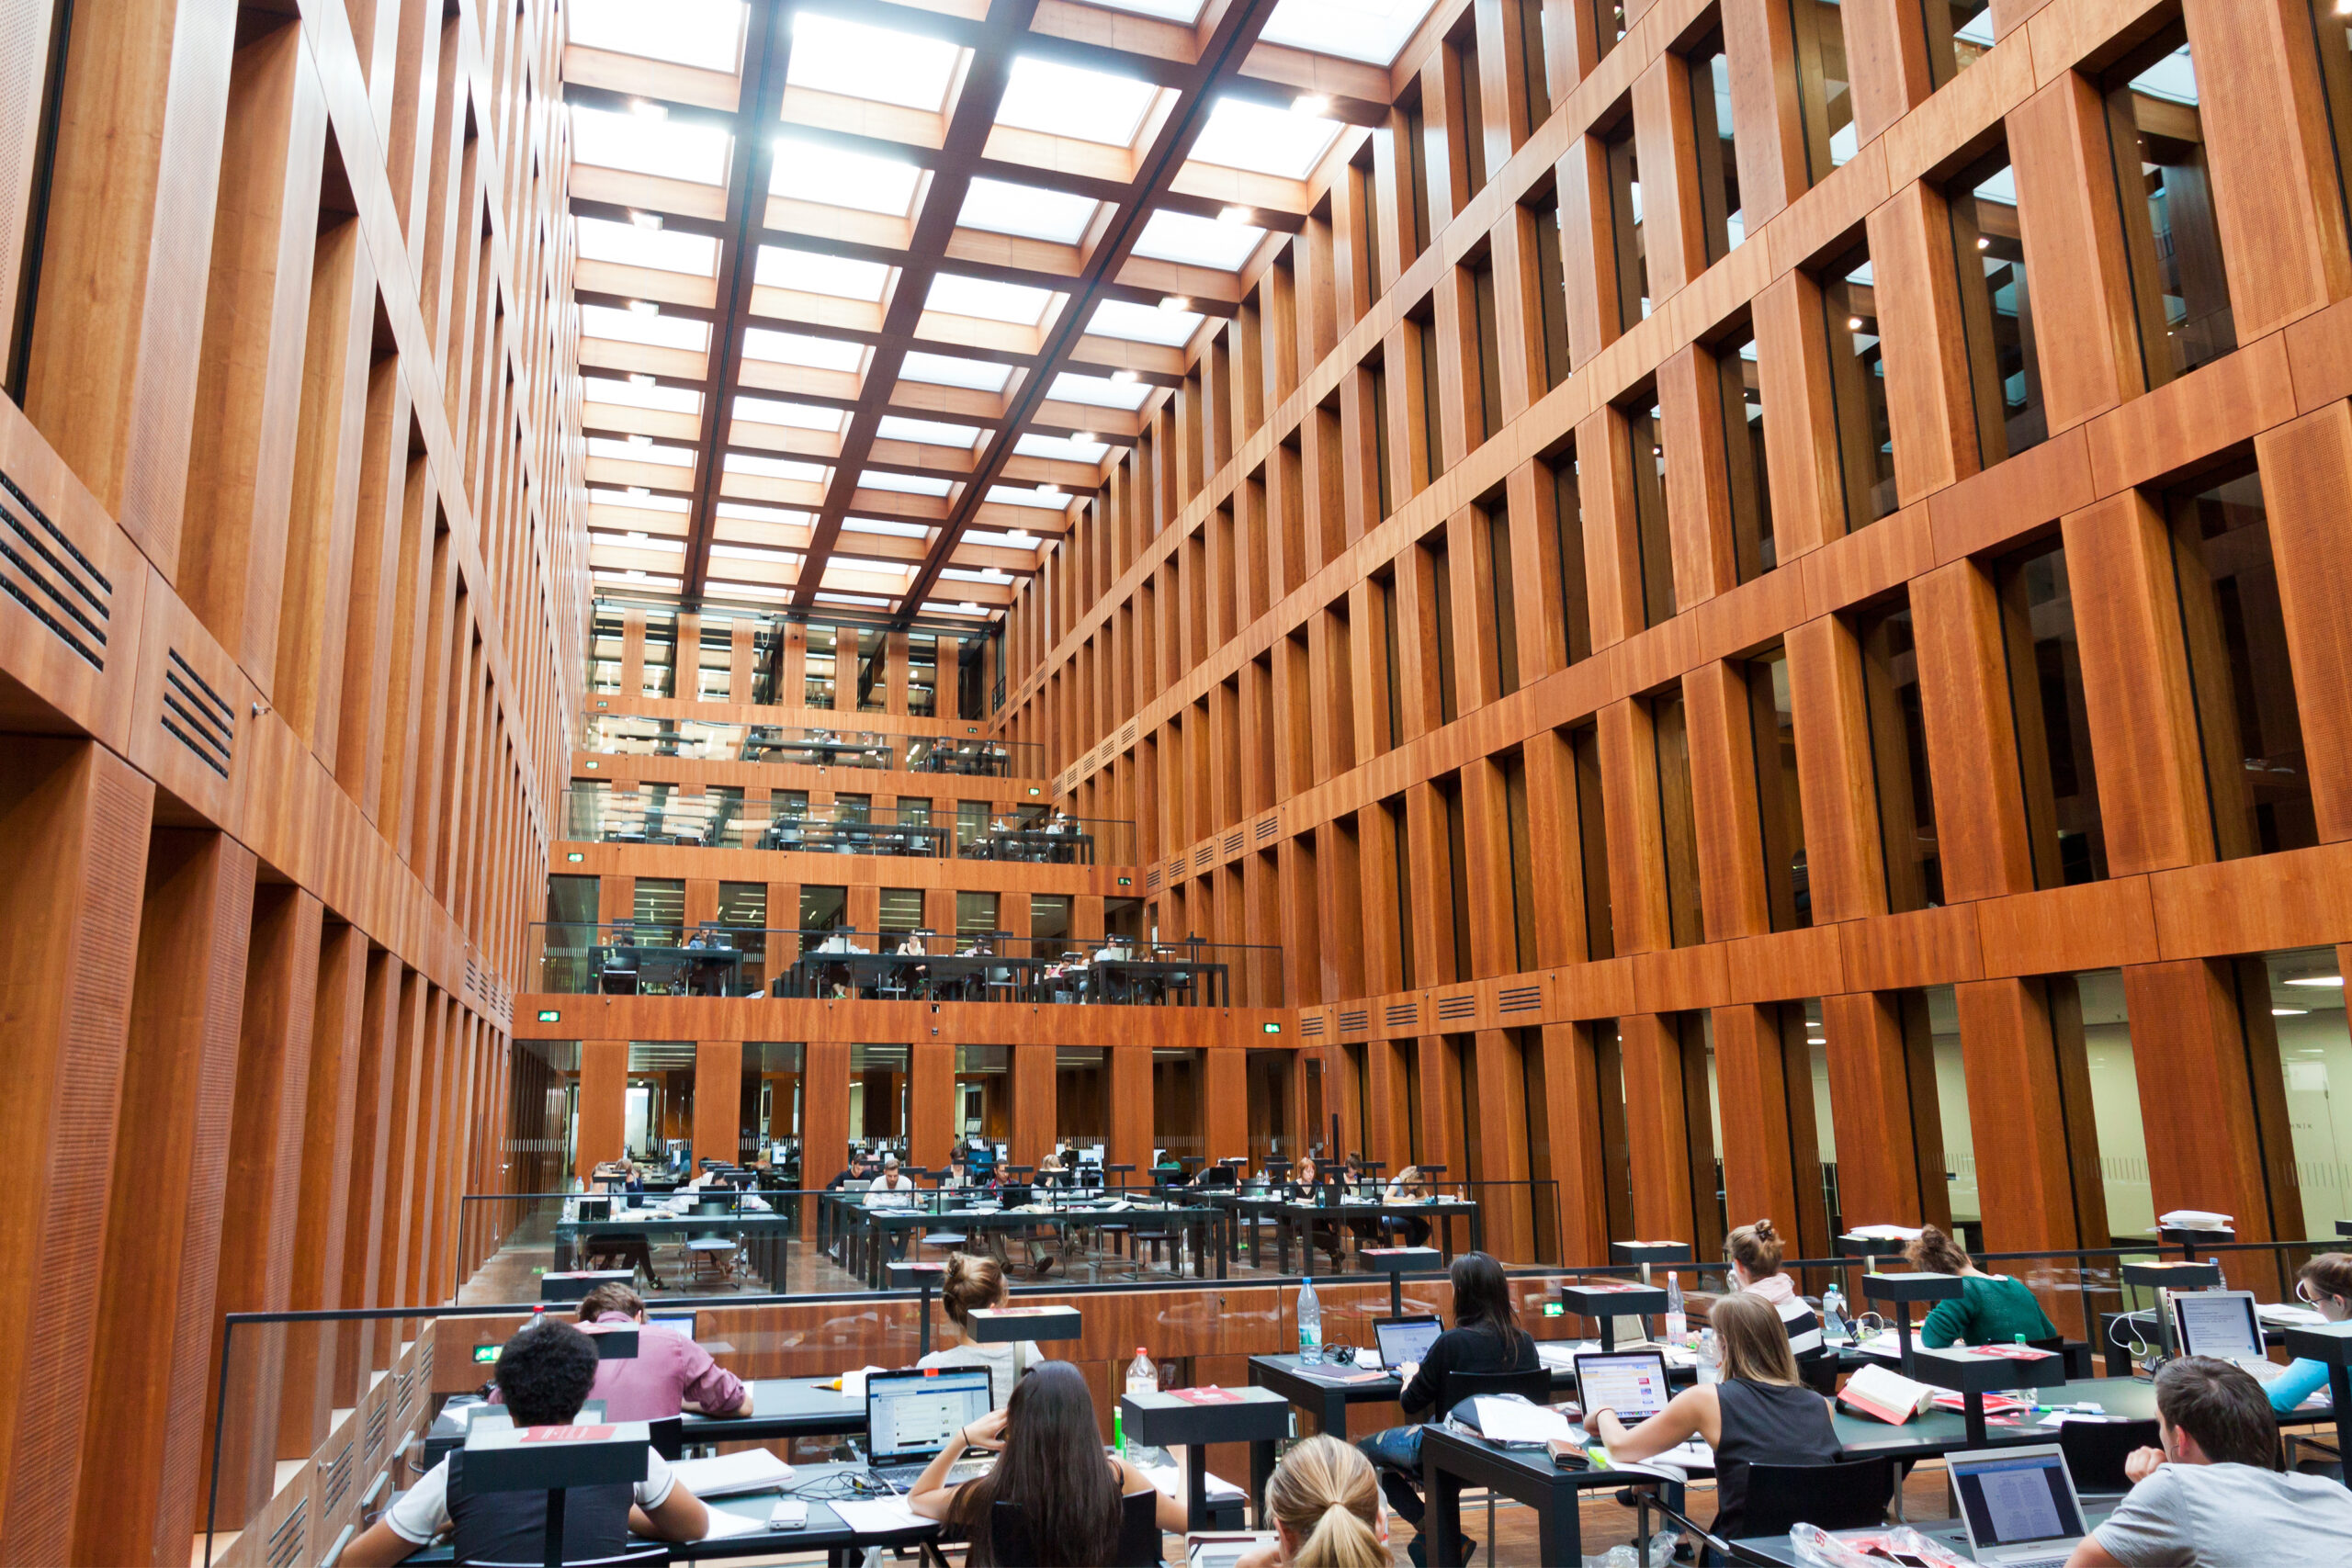 BERLIN, GERMANY - JULY 1, 2014: Humboldt University Library in Berlin. It is one of the most advanced scientific libraries in Germany